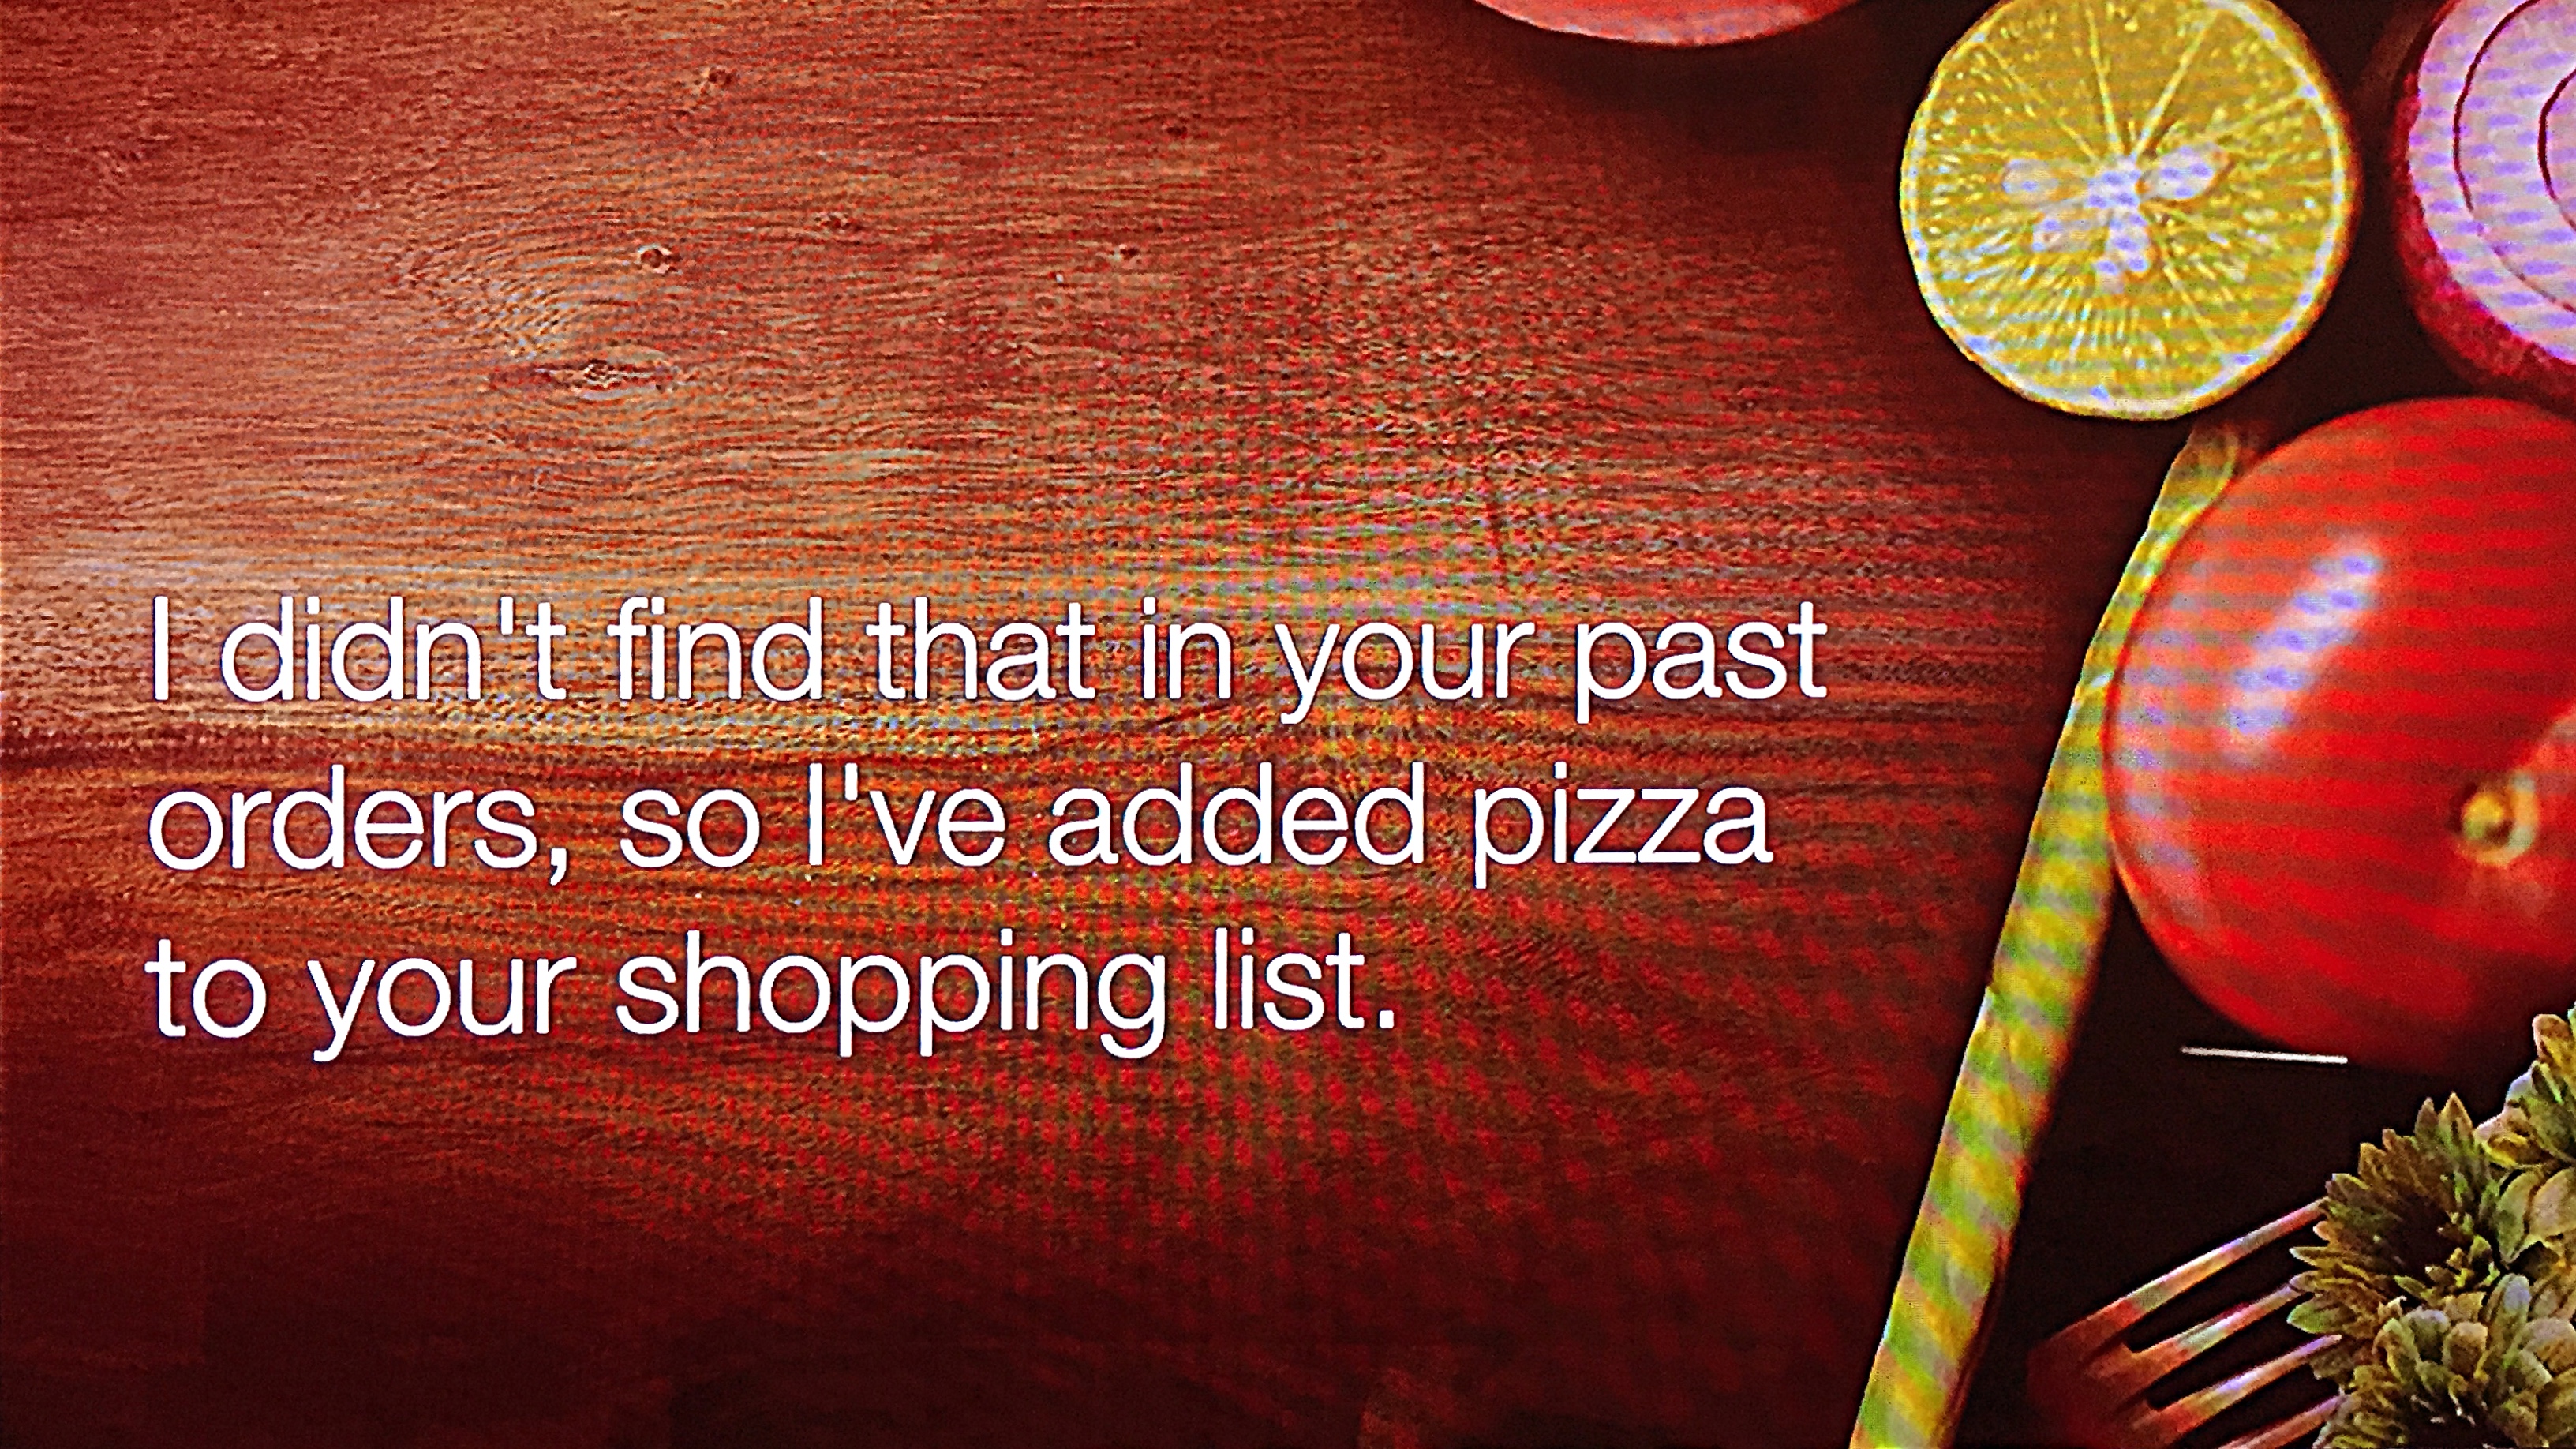 Alexa added pizza to my shopping list.